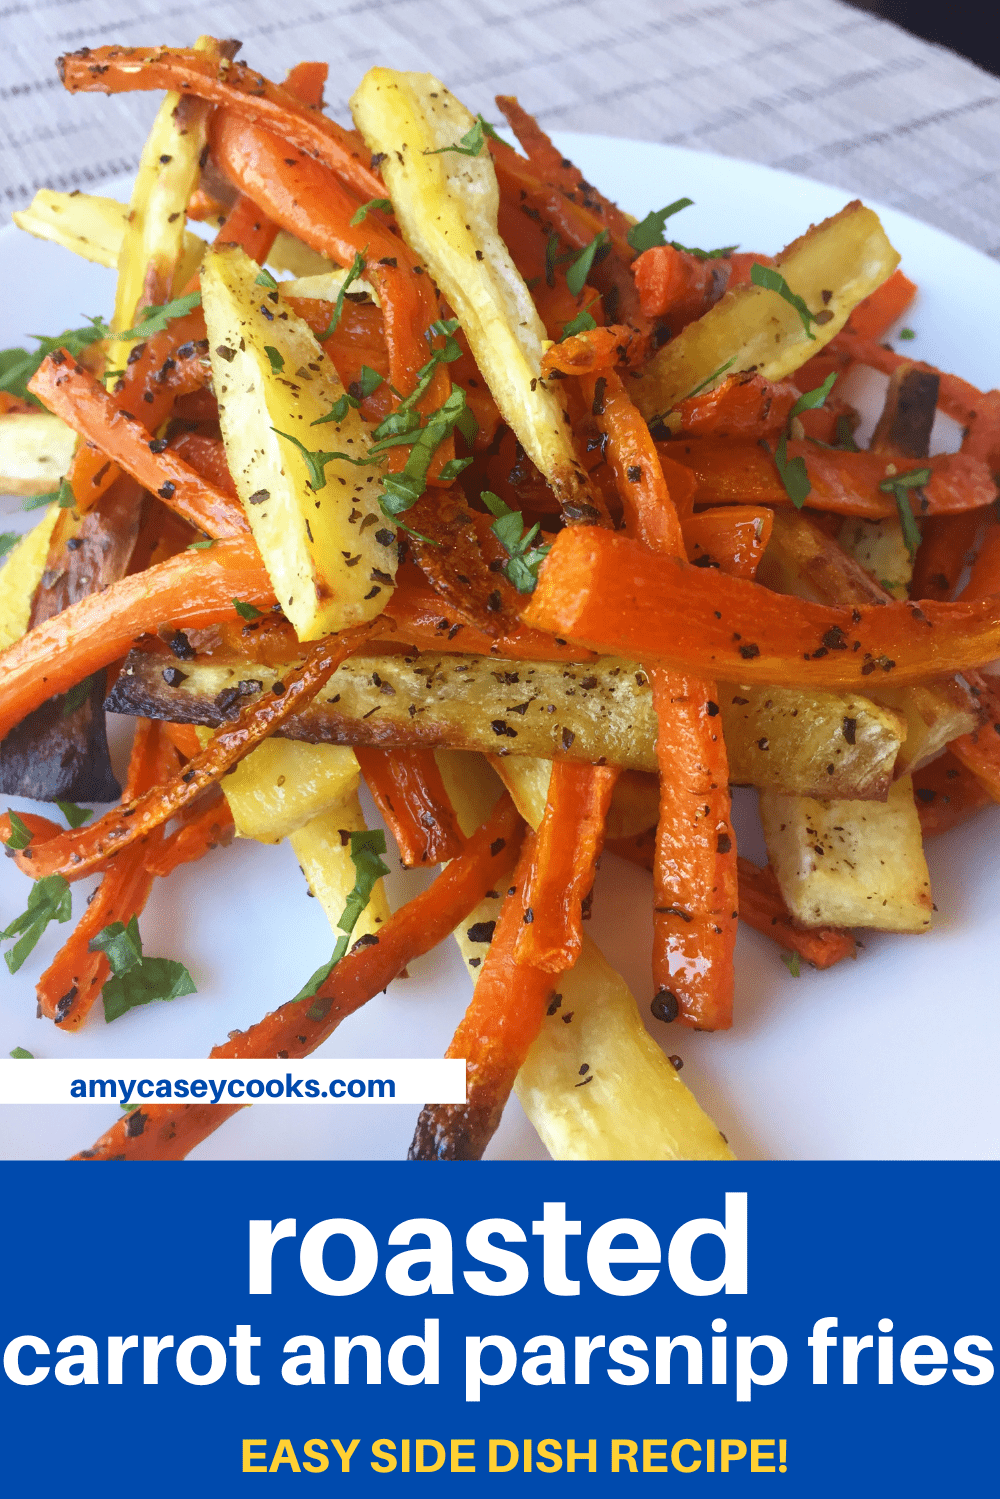 plate of carrot and parsnip fries